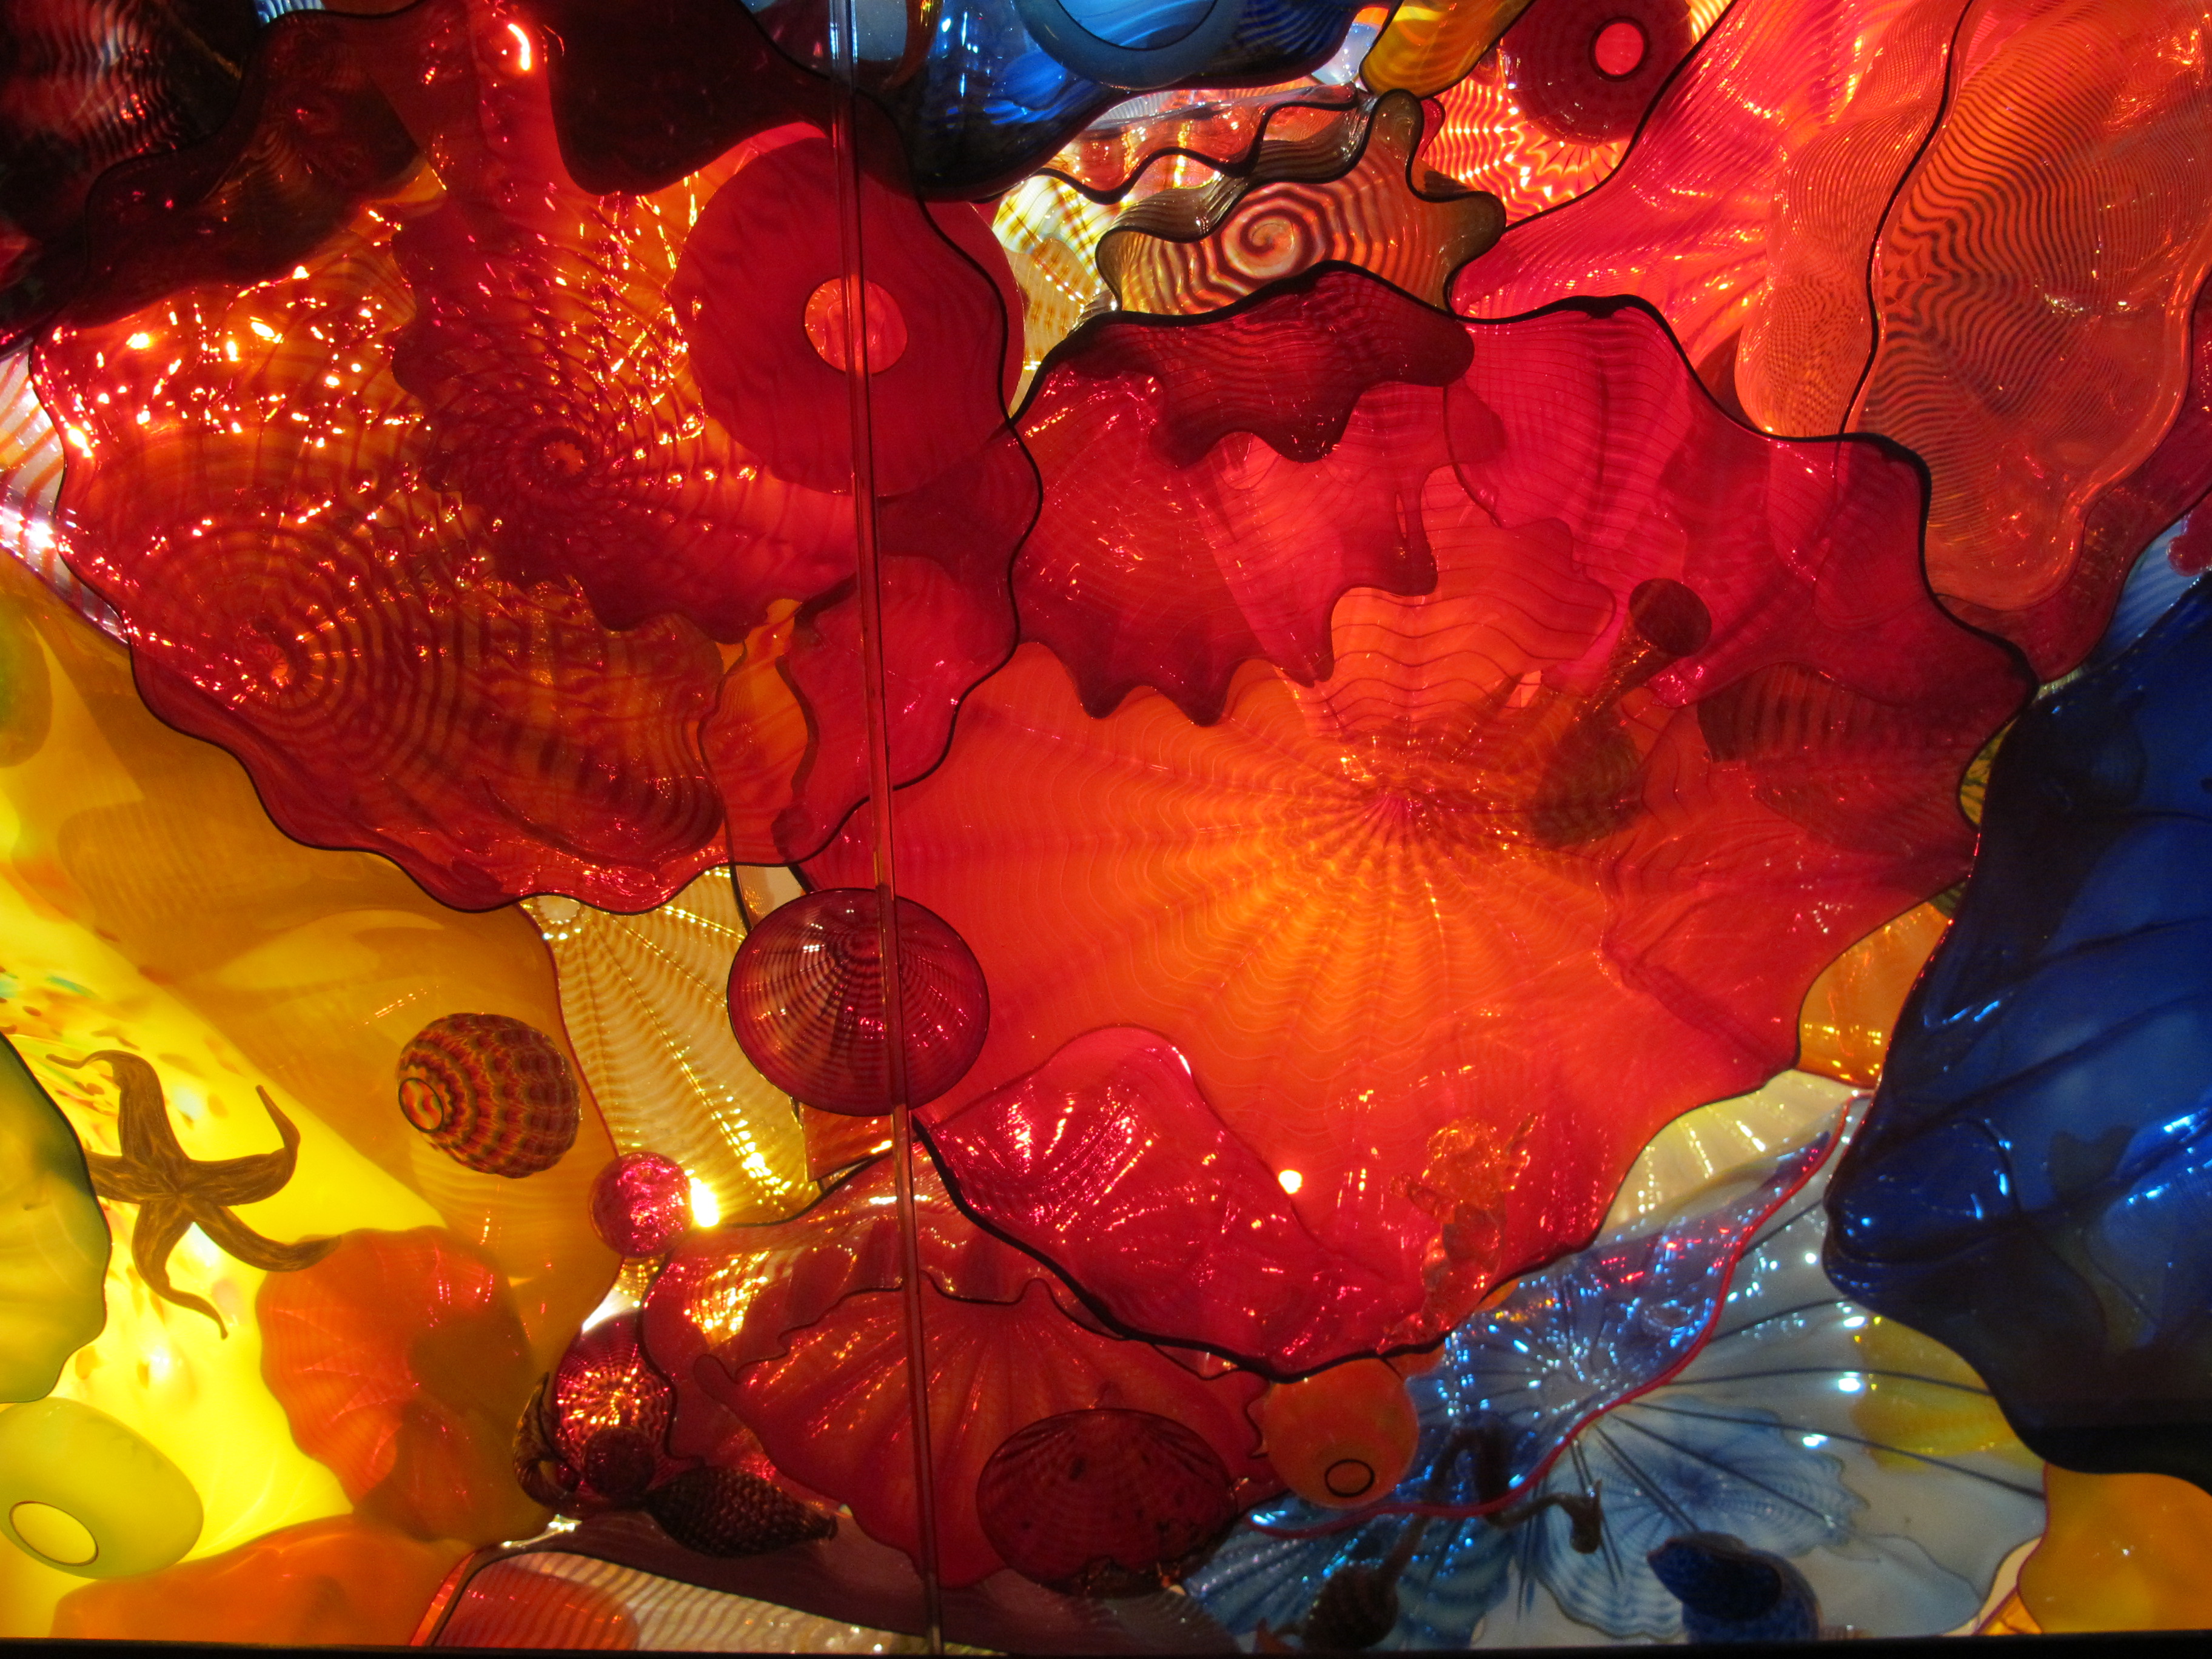 Washington State native, Dale Chihuly’s work is included in more than 200 museum collections worldwide. Photo by Marla Norman